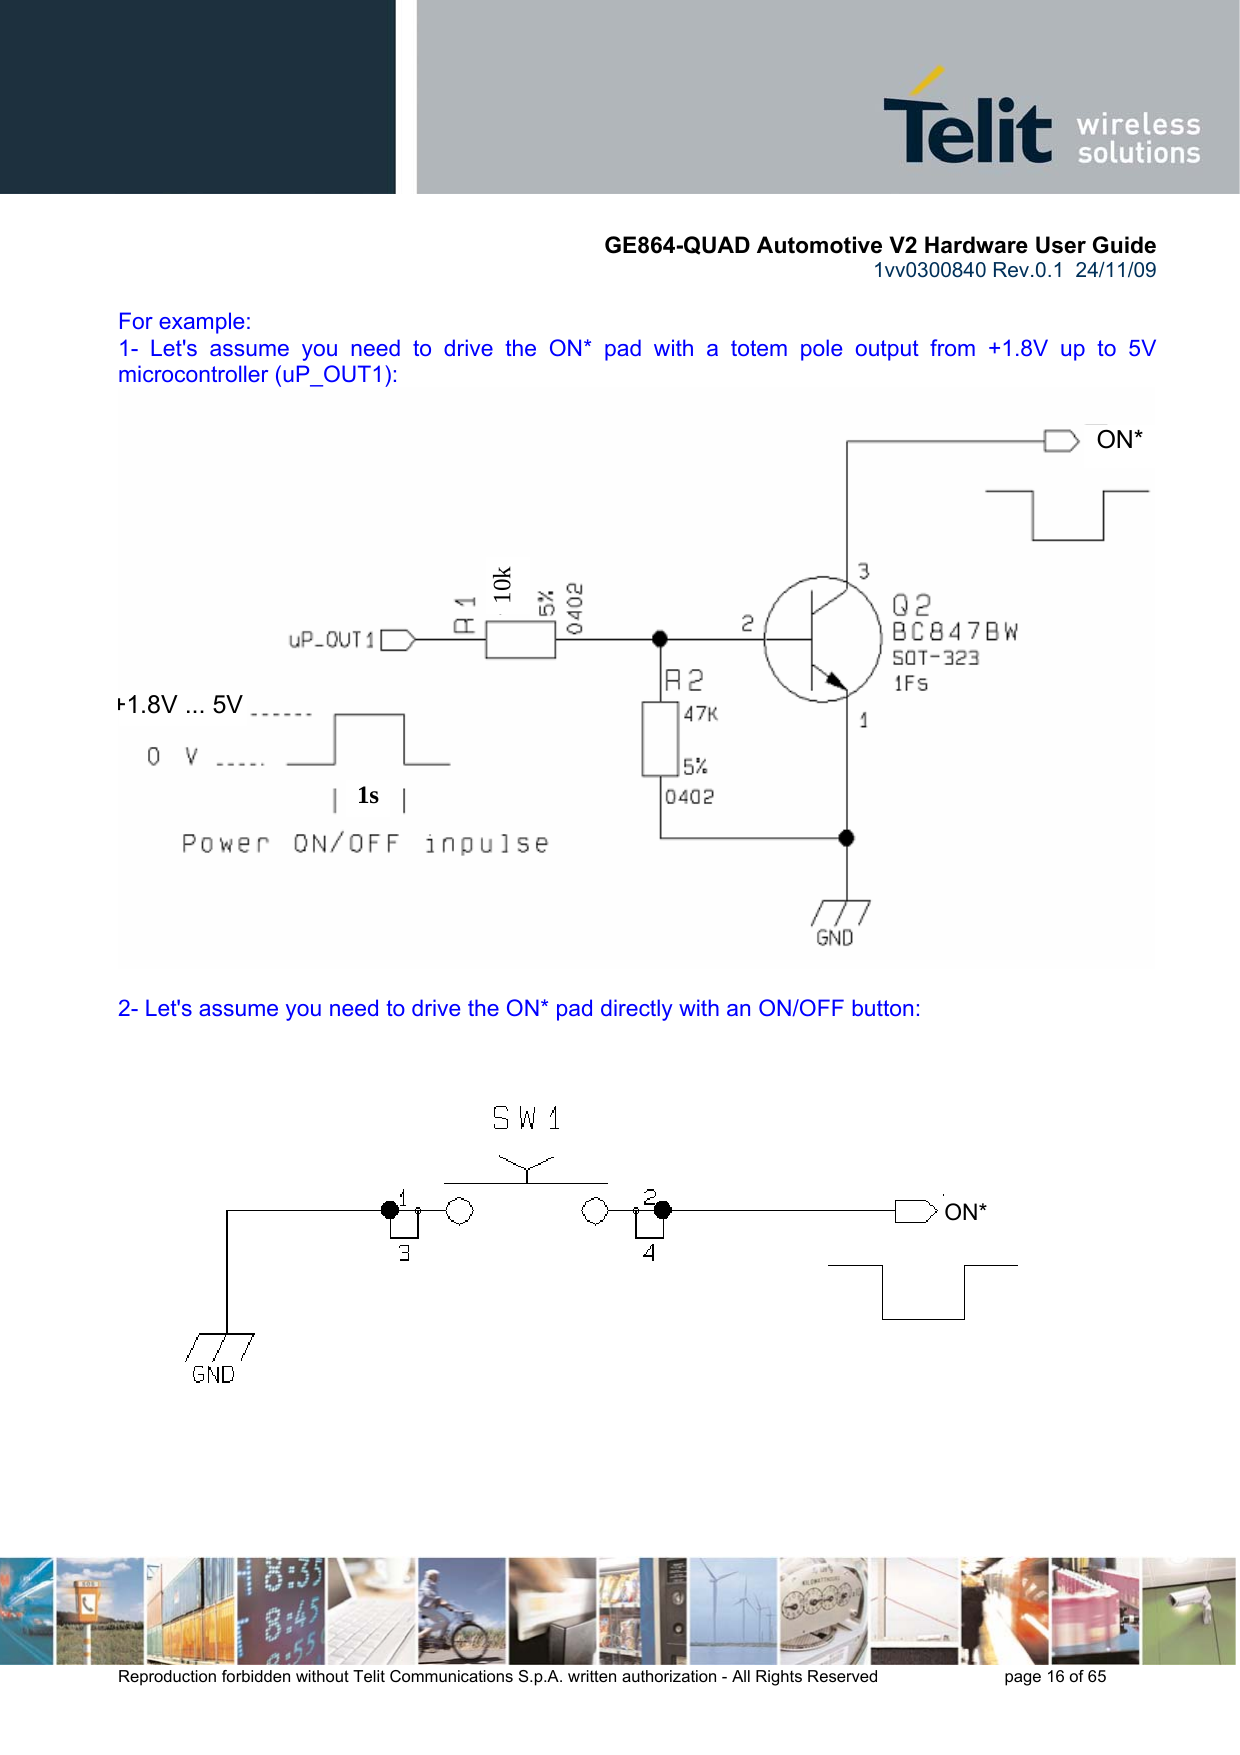       GE864-QUAD Automotive V2 Hardware User Guide 1vv0300840 Rev.0.1  24/11/09      Reproduction forbidden without Telit Communications S.p.A. written authorization - All Rights Reserved    page 16 of 65   For example: 1- Let&apos;s assume you need to drive the ON* pad with a totem pole output from +1.8V up to 5V microcontroller (uP_OUT1):  2- Let&apos;s assume you need to drive the ON* pad directly with an ON/OFF button:    1s10k   ON*+1.8V ... 5V    ON* 